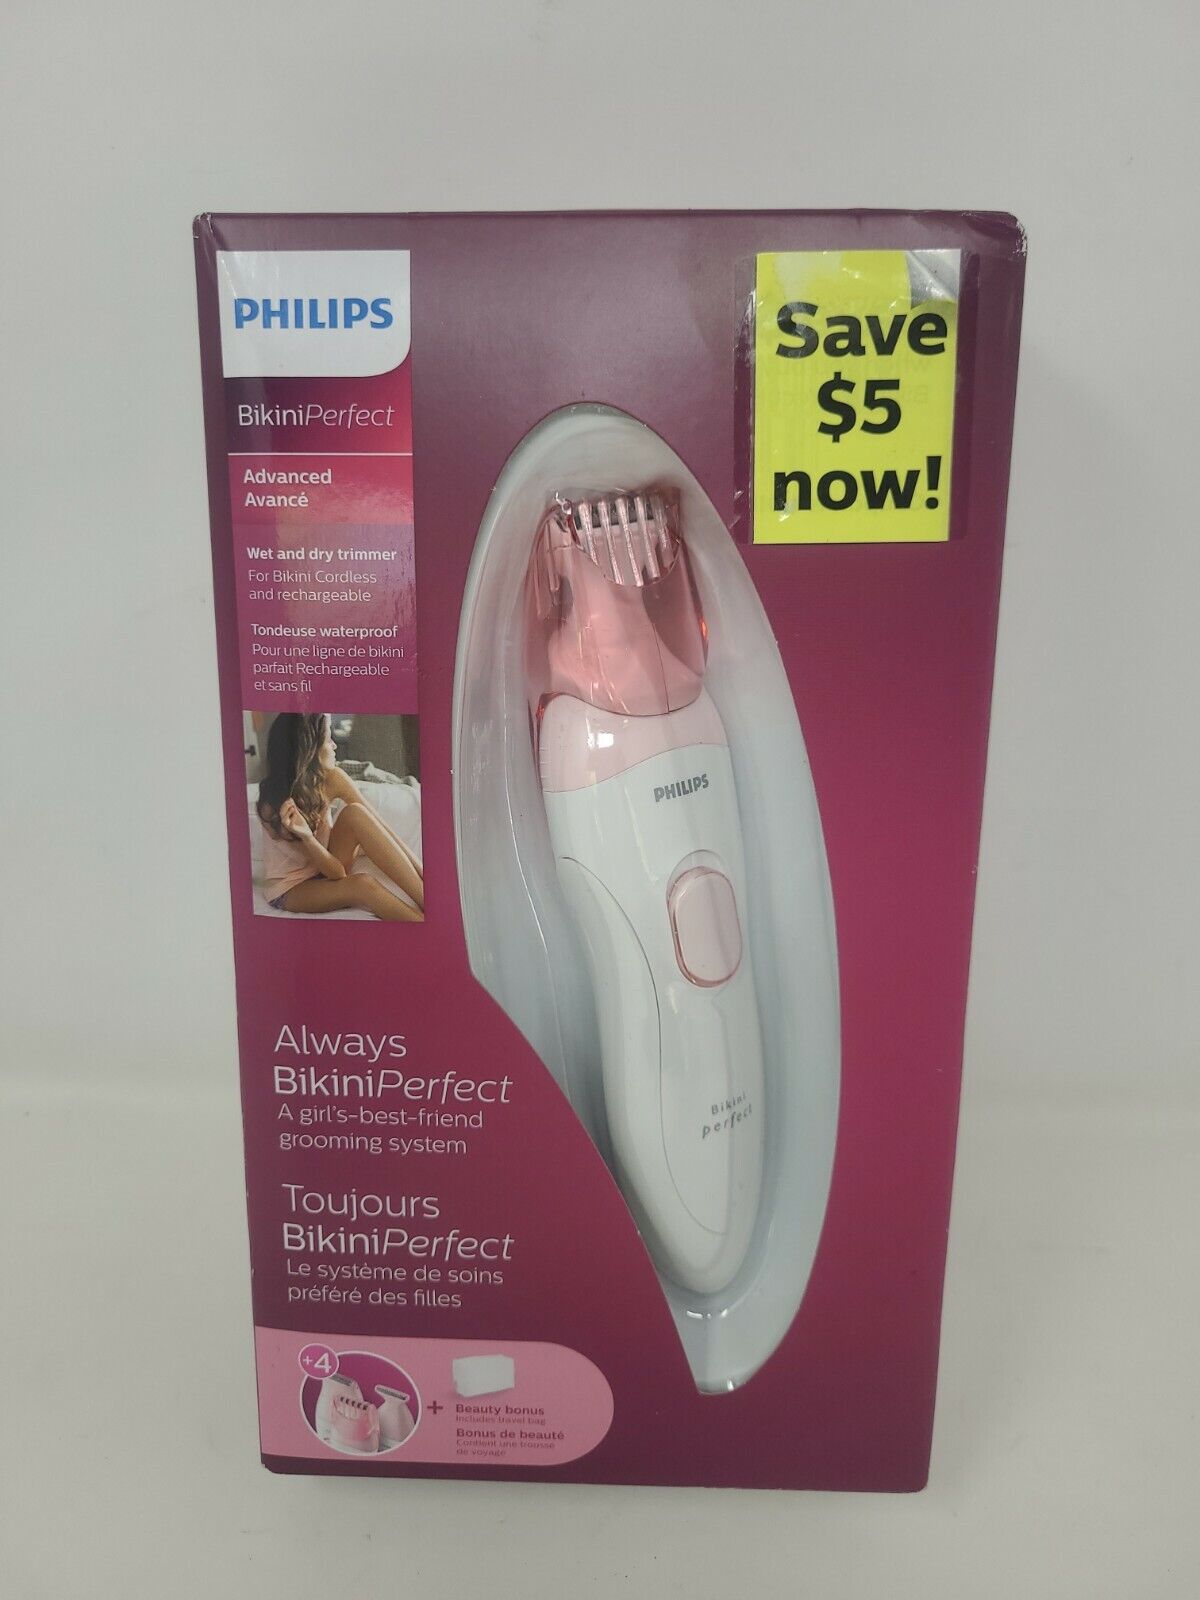 Philips Bikini Perfect Advanced Manufacturer Chicago Mall direct delivery Trimmer New -HP6376 61- Pink